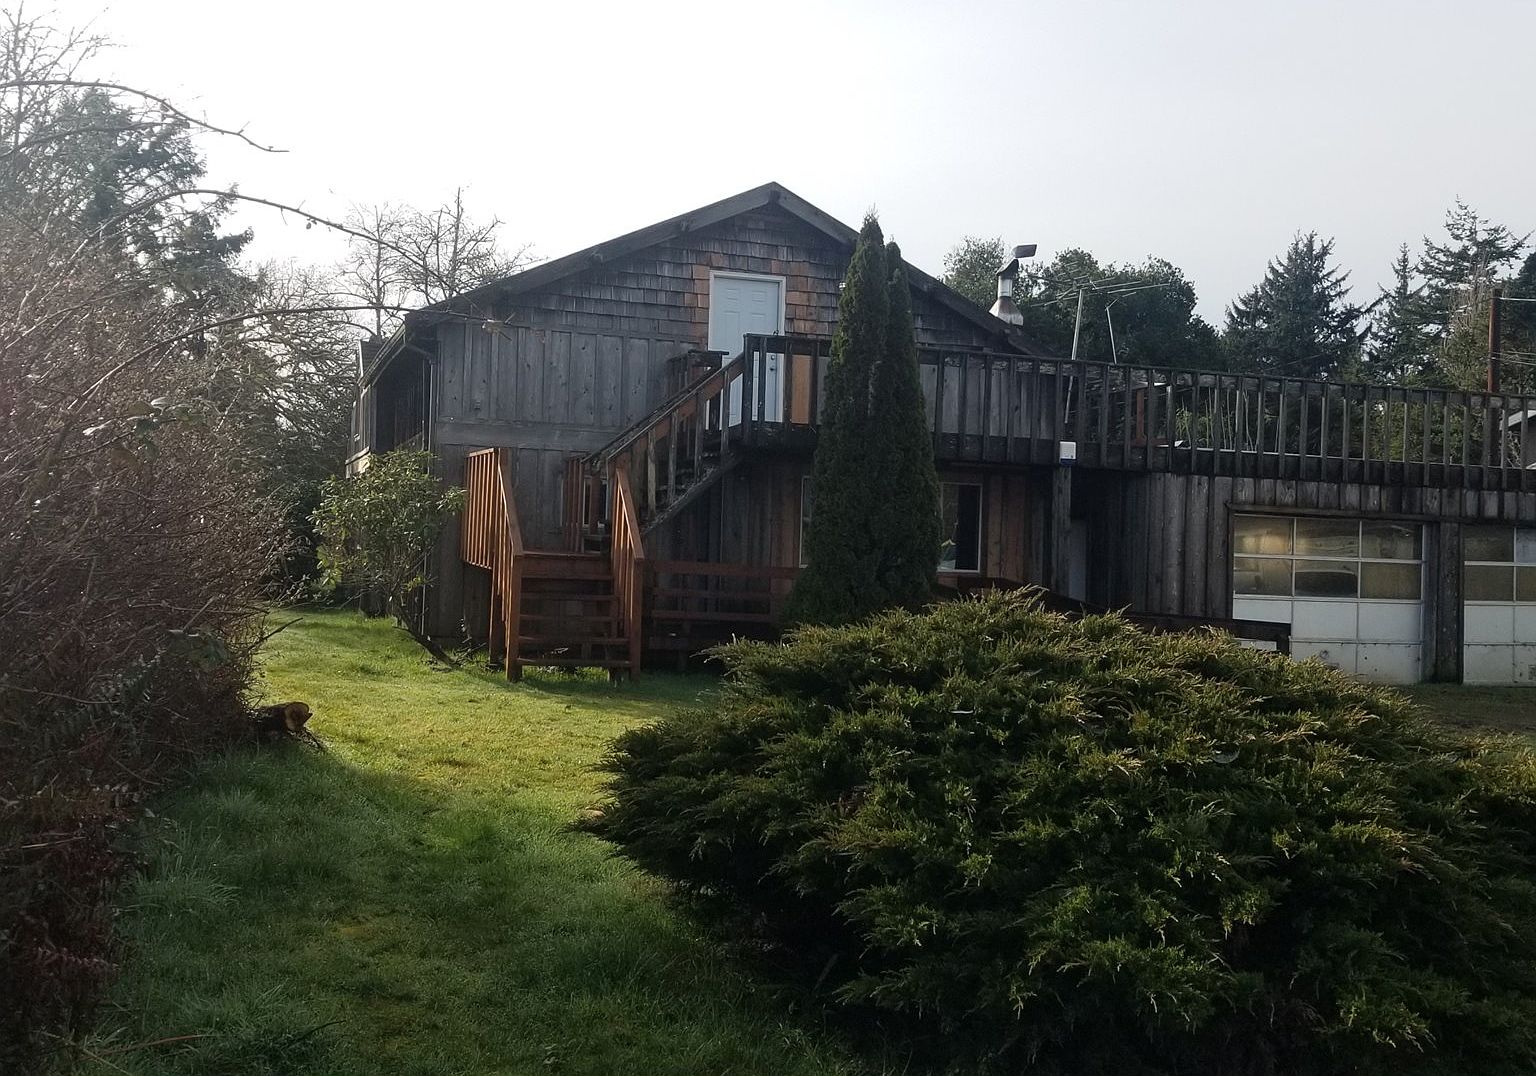 900 Henderson Ln Coos Bay Or 974 Zillow